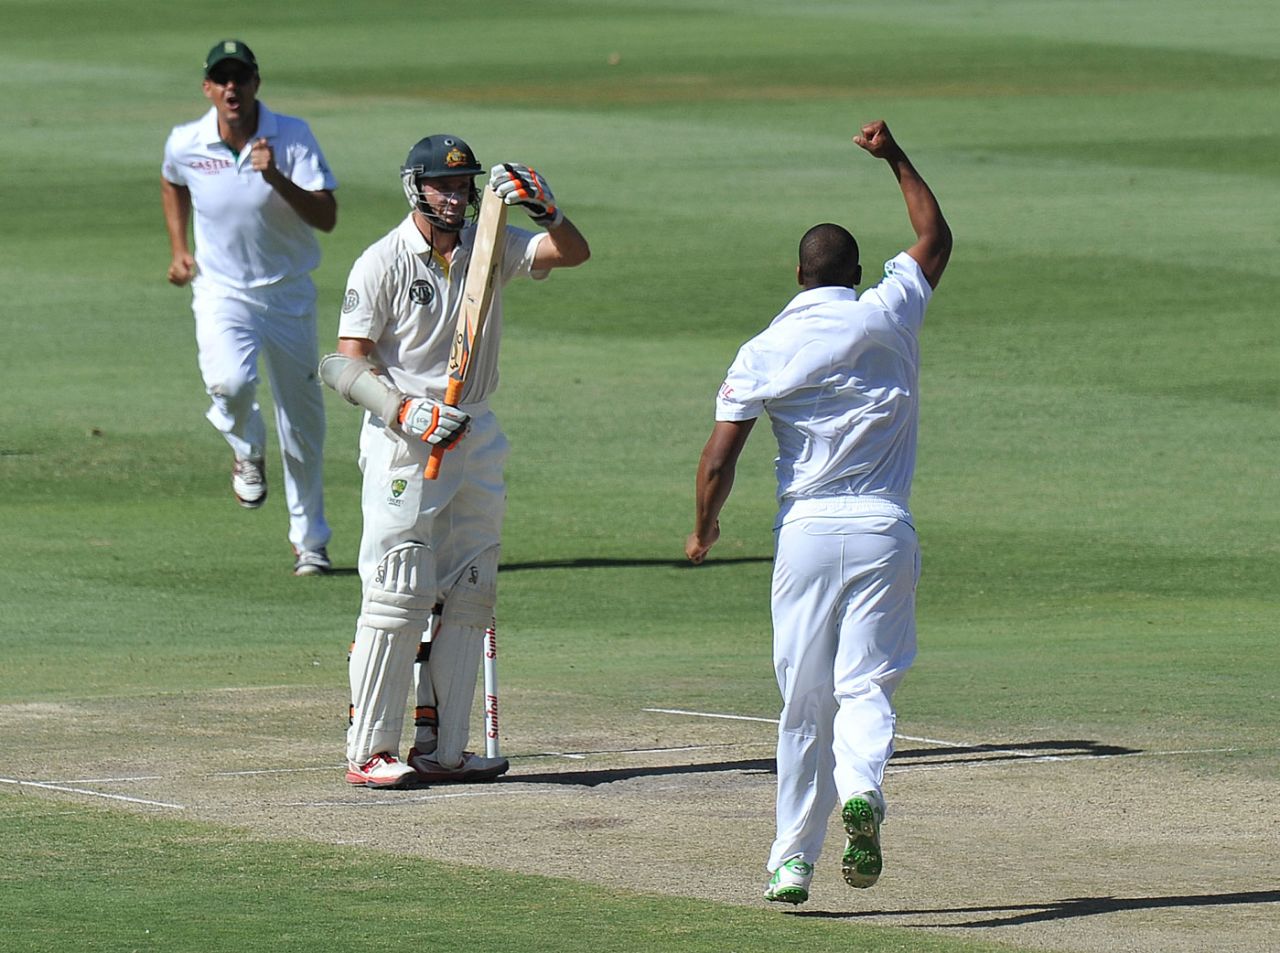 Michael Hussey calls for a review, South Africa v Australia, 2nd Test, Johannesburg, 5th day, November 2011